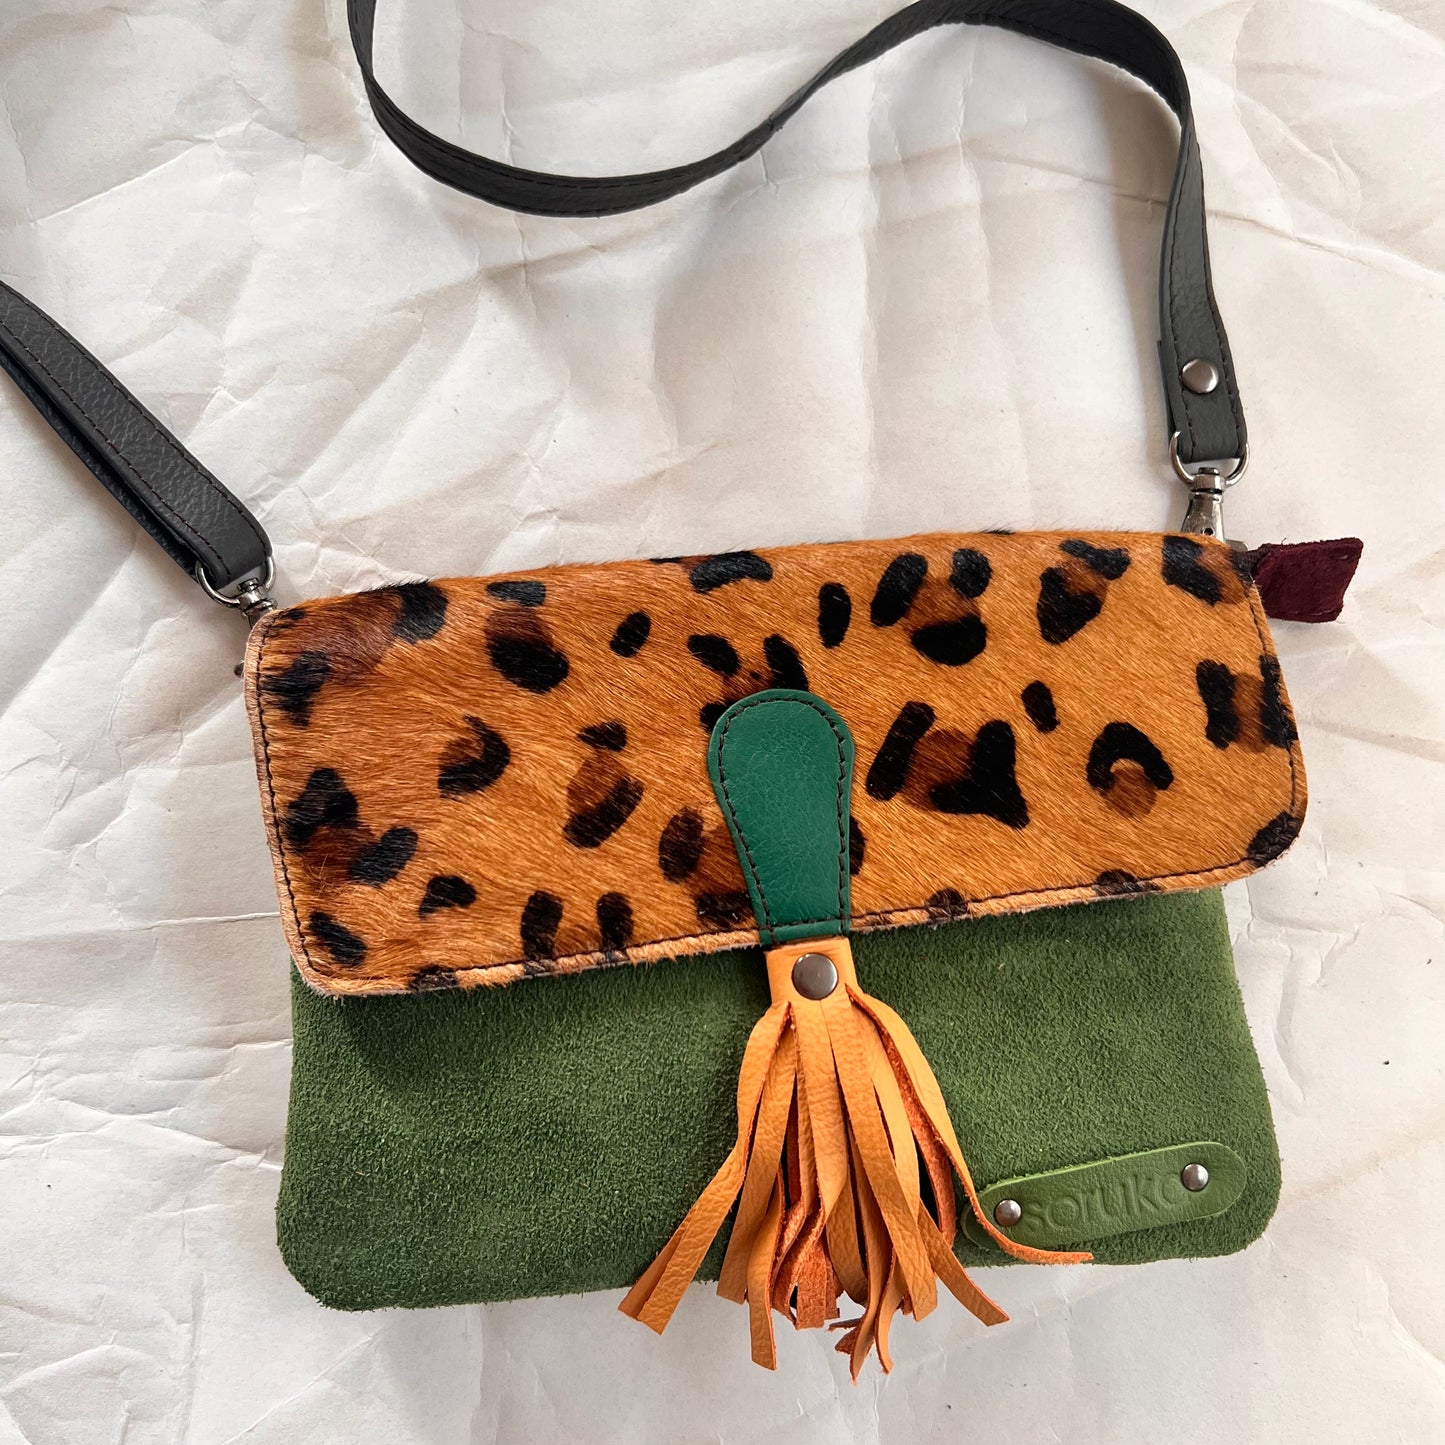 juliette bag with animal print flap, peach tassel, and crossbody strap clipped on it.